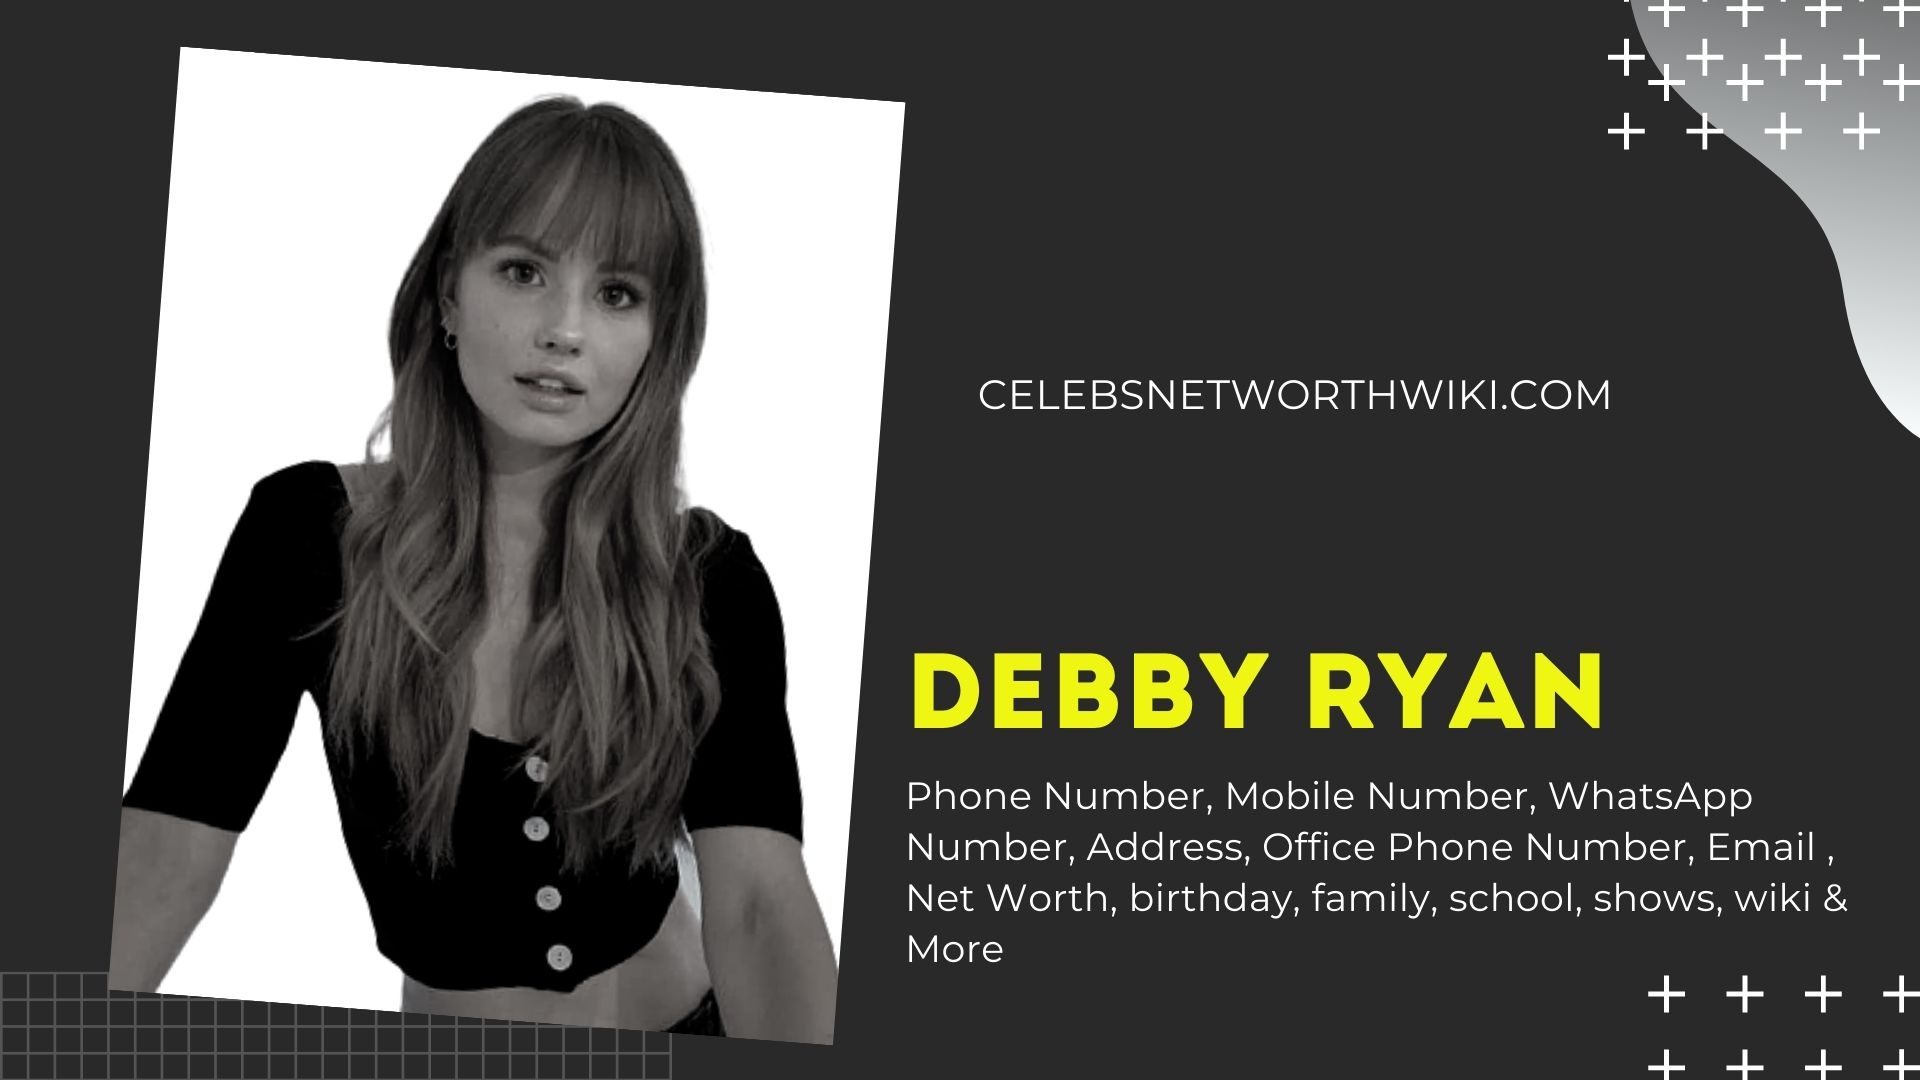 Debby Ryan Phone Number Texting Number Contact Number Mobile.